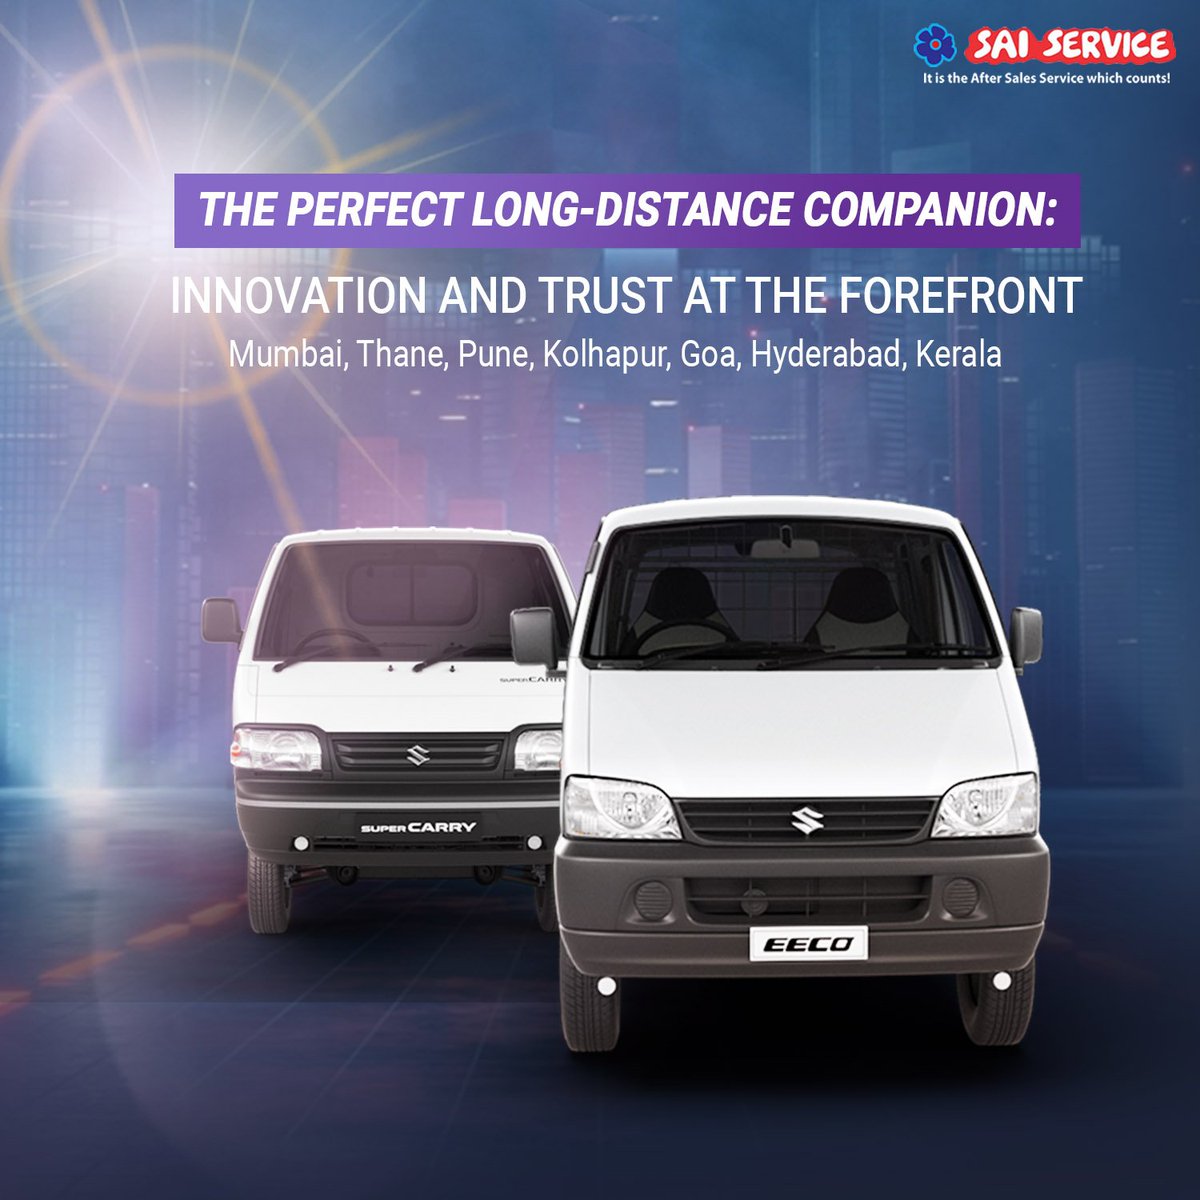 Choose Our Commercial Vehicles for Seamless Operations! Your Partner in Growth.

Visit saiservice.com/buy/commercial…
to know more!

#saiservices #saiserviceindia #commercialvehicle #vehicle #commercial  #newcar #automotive #nexa #arena #marutisuzuki #suzuki   #drivemode #drive